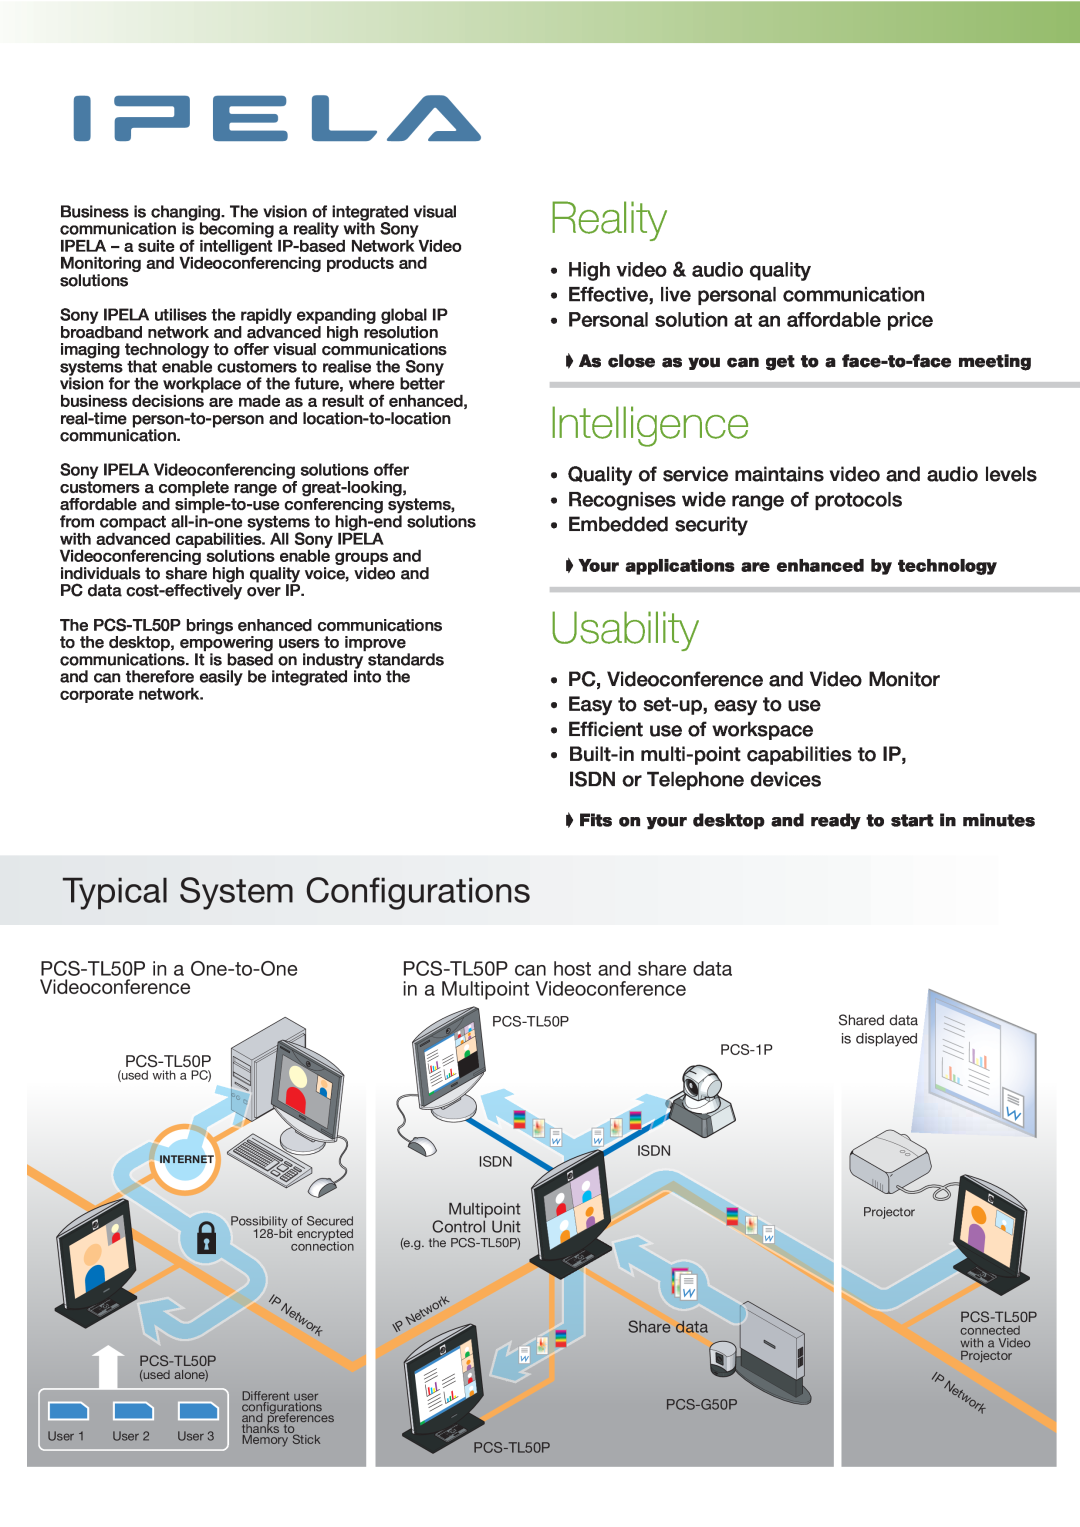 Sony PCS-TL50P Typical System Configurations, Reality, Intelligence, Usability, Personal solution at an affordable price 